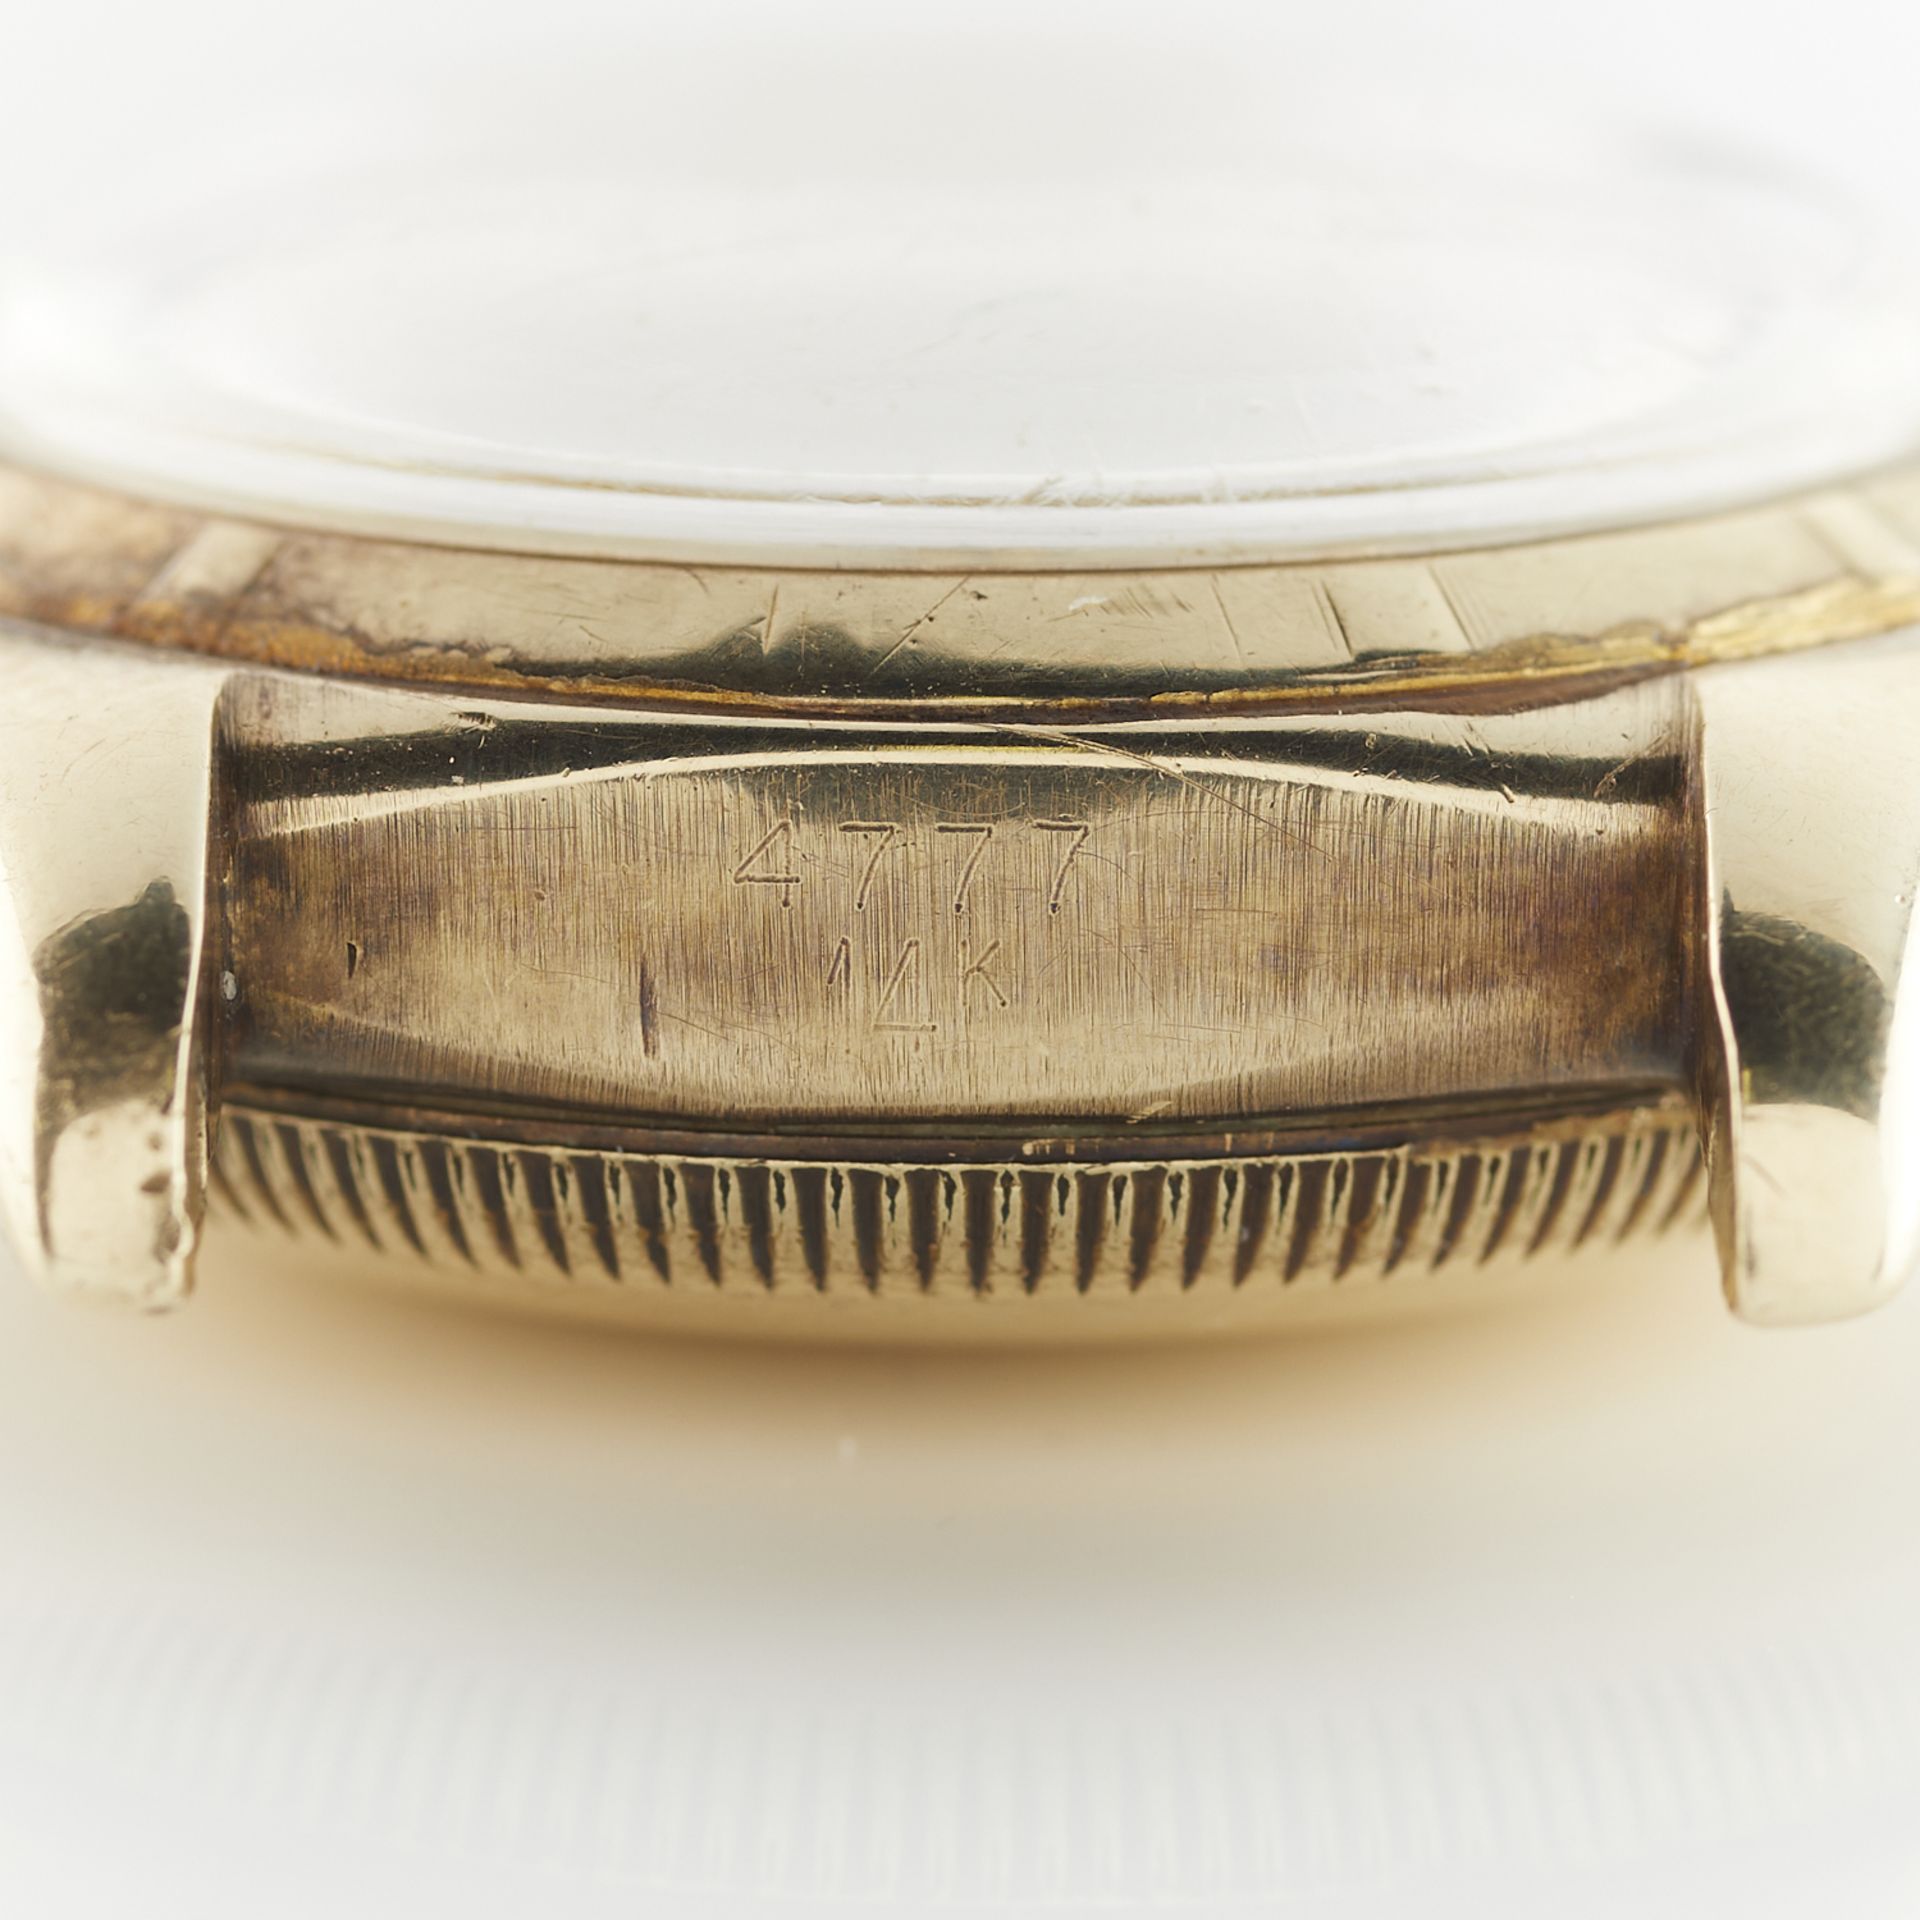 14k Rolex Oyster Perpetual 4777 Bubble Back - Image 10 of 14